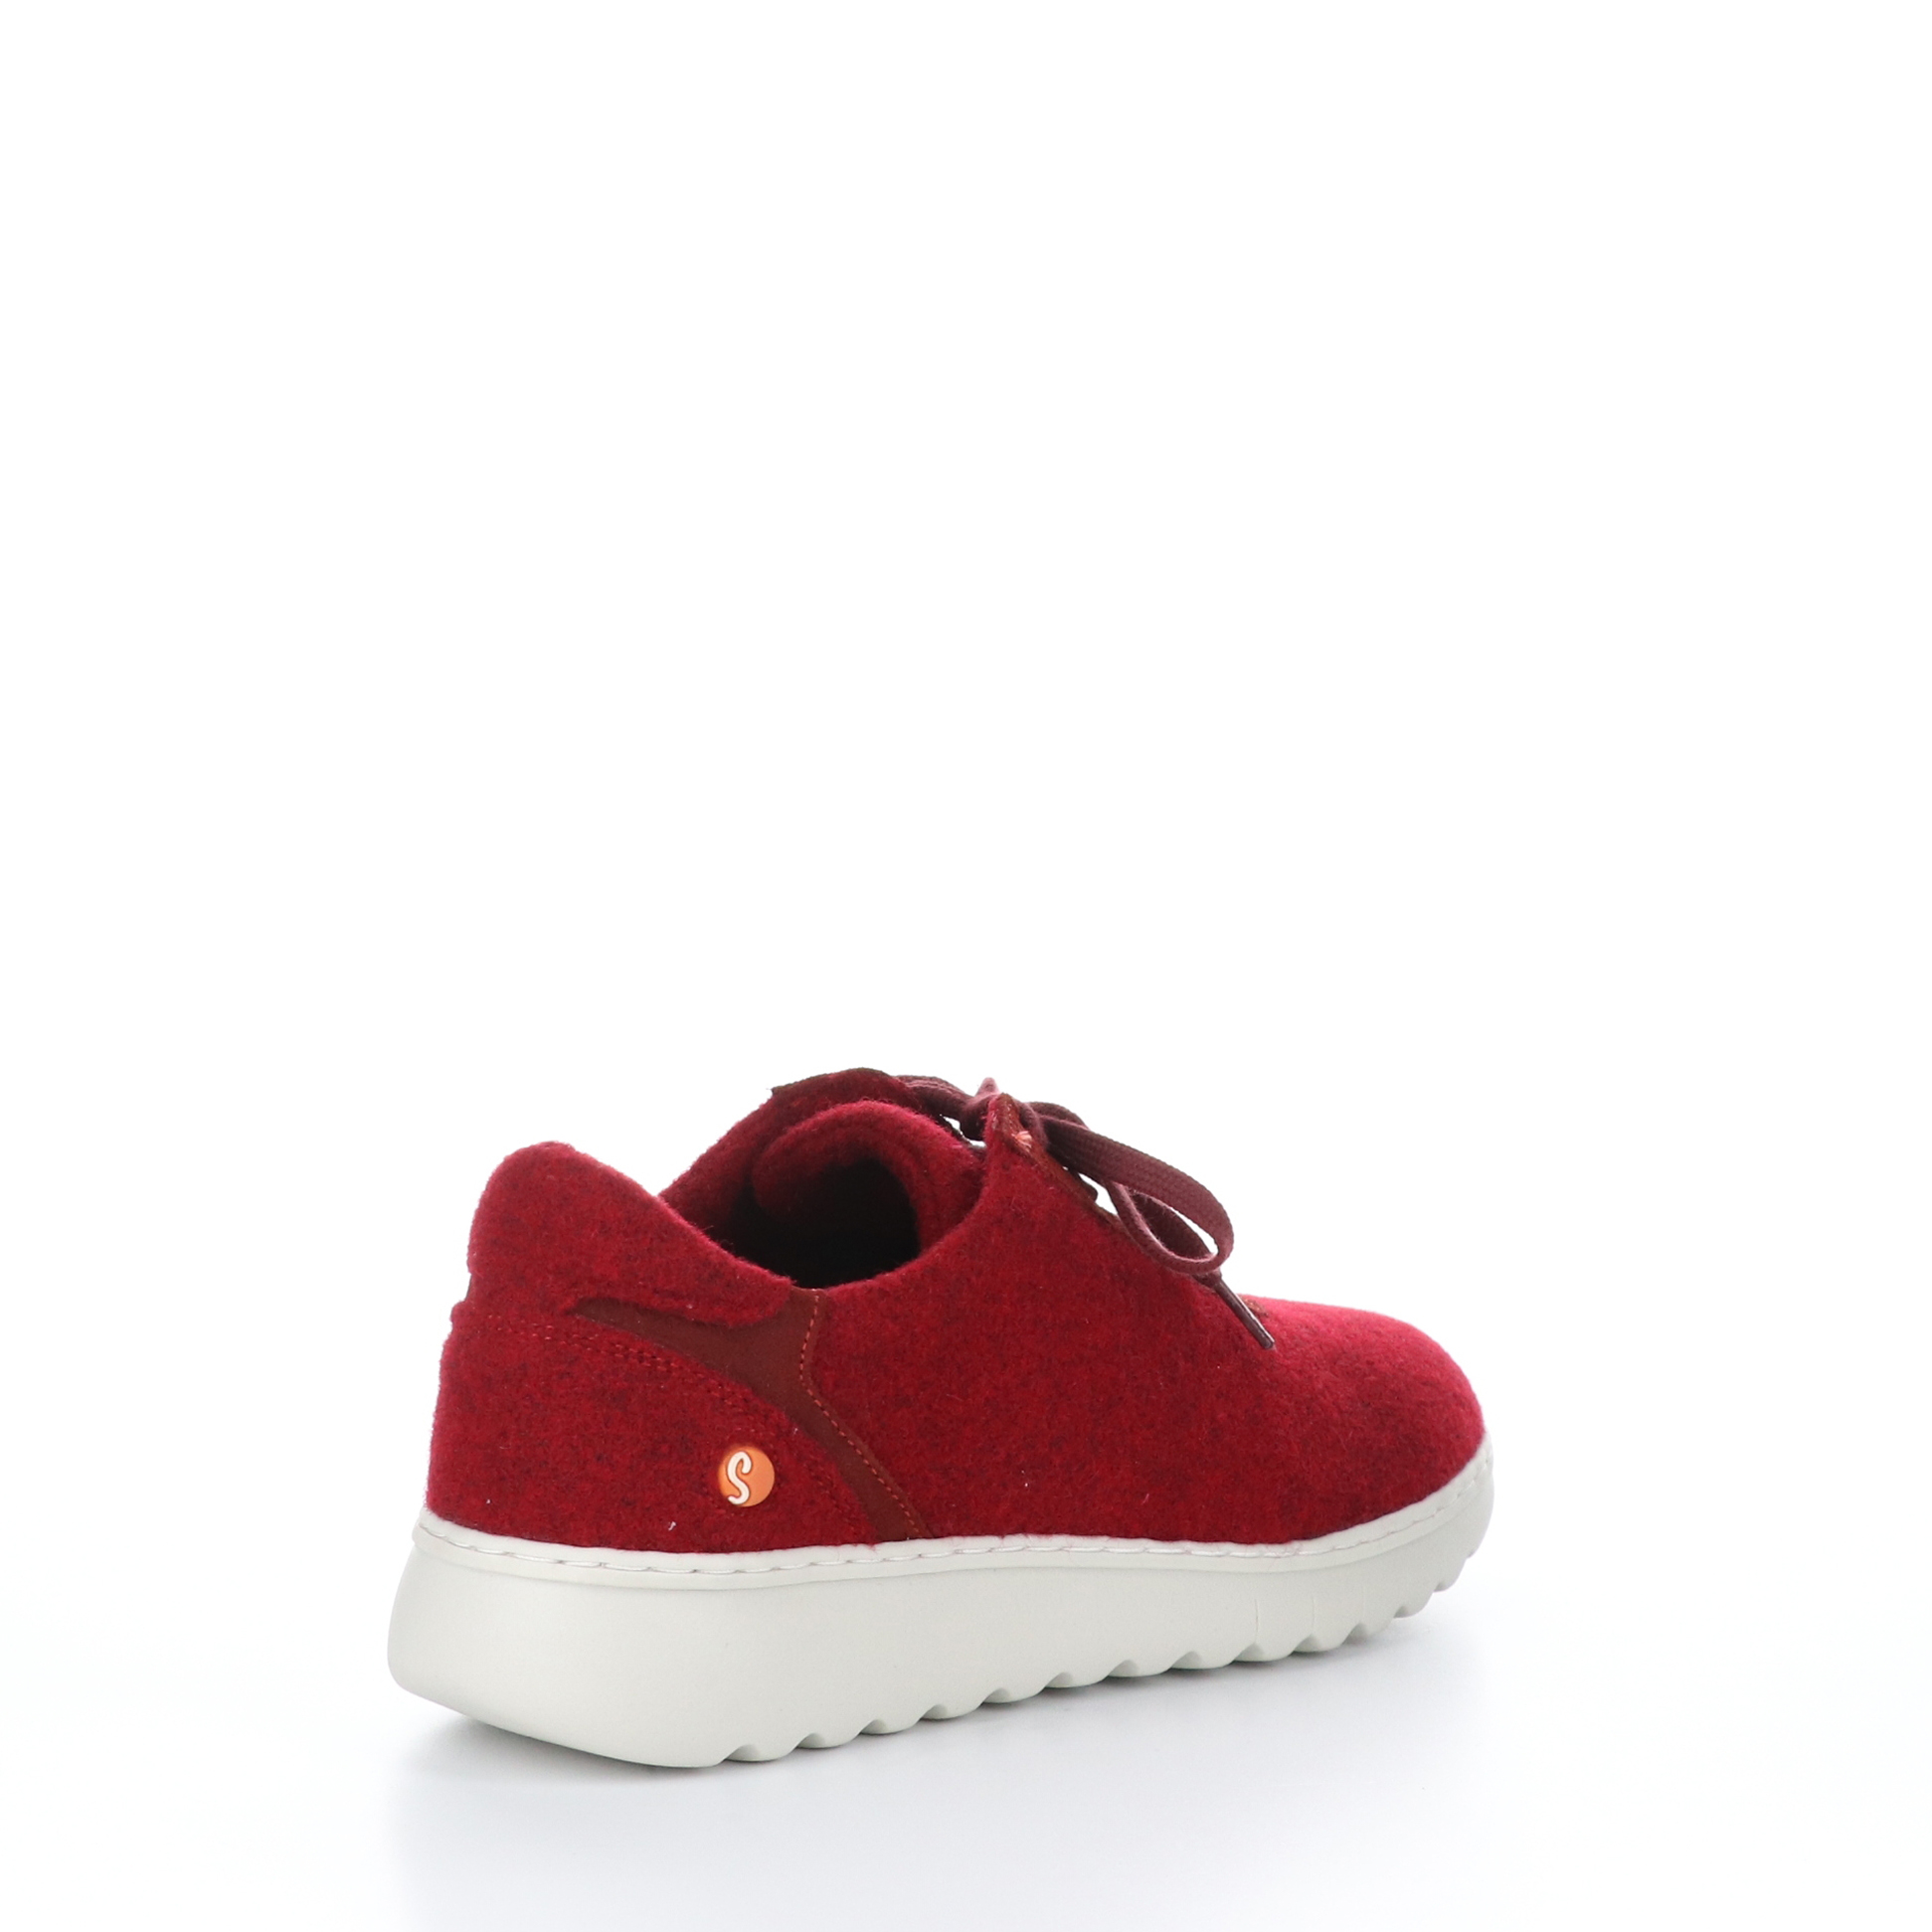 Outer back side view of the softinos elra sneaker in red. These tweed sneakers have a lace up front and a white sole.